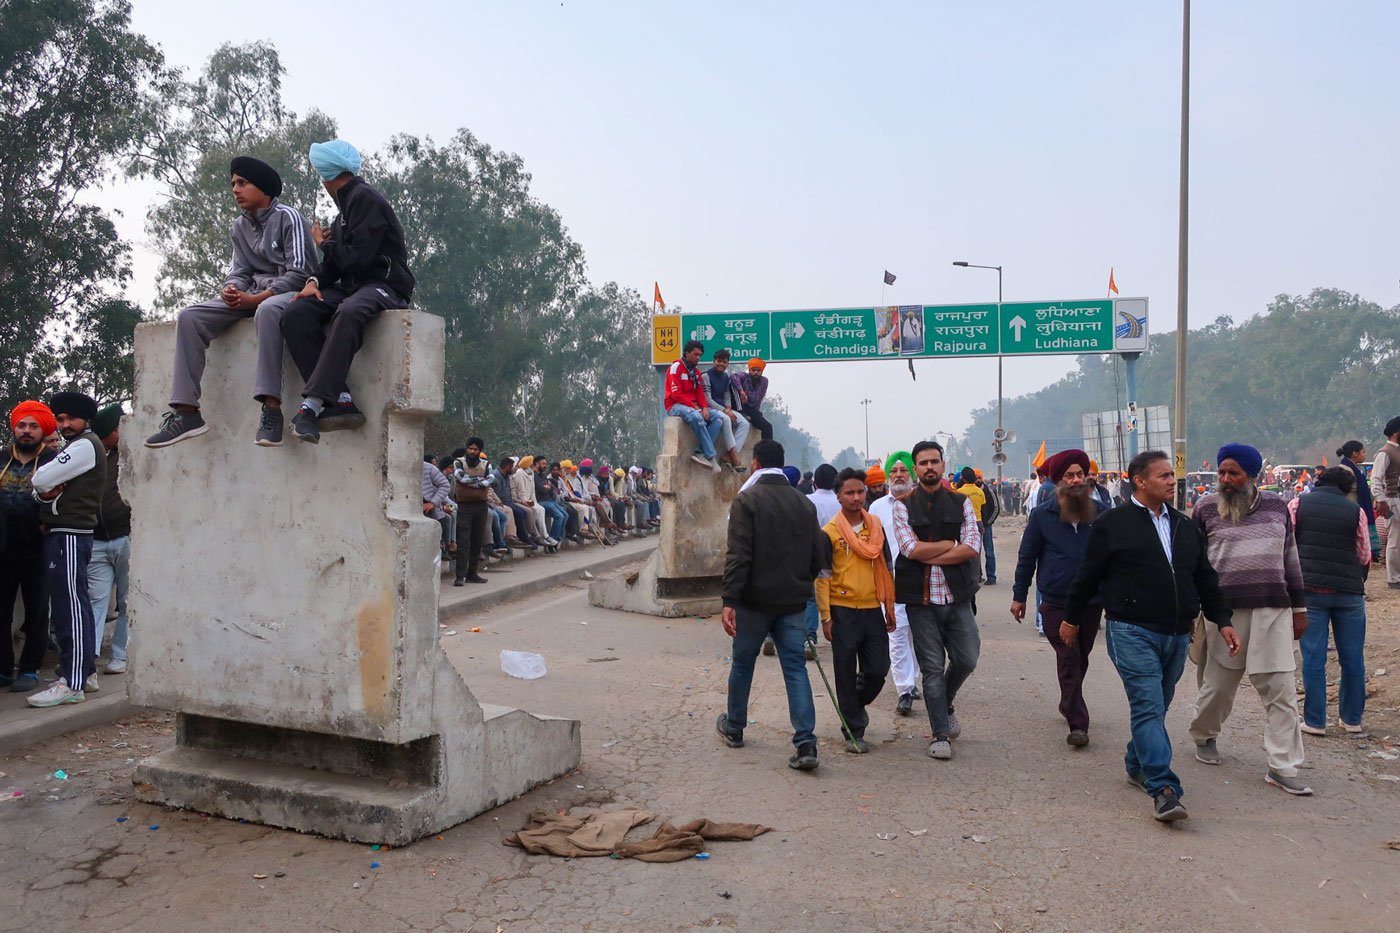 Protesters sit on the concrete barricades, facing Haryana